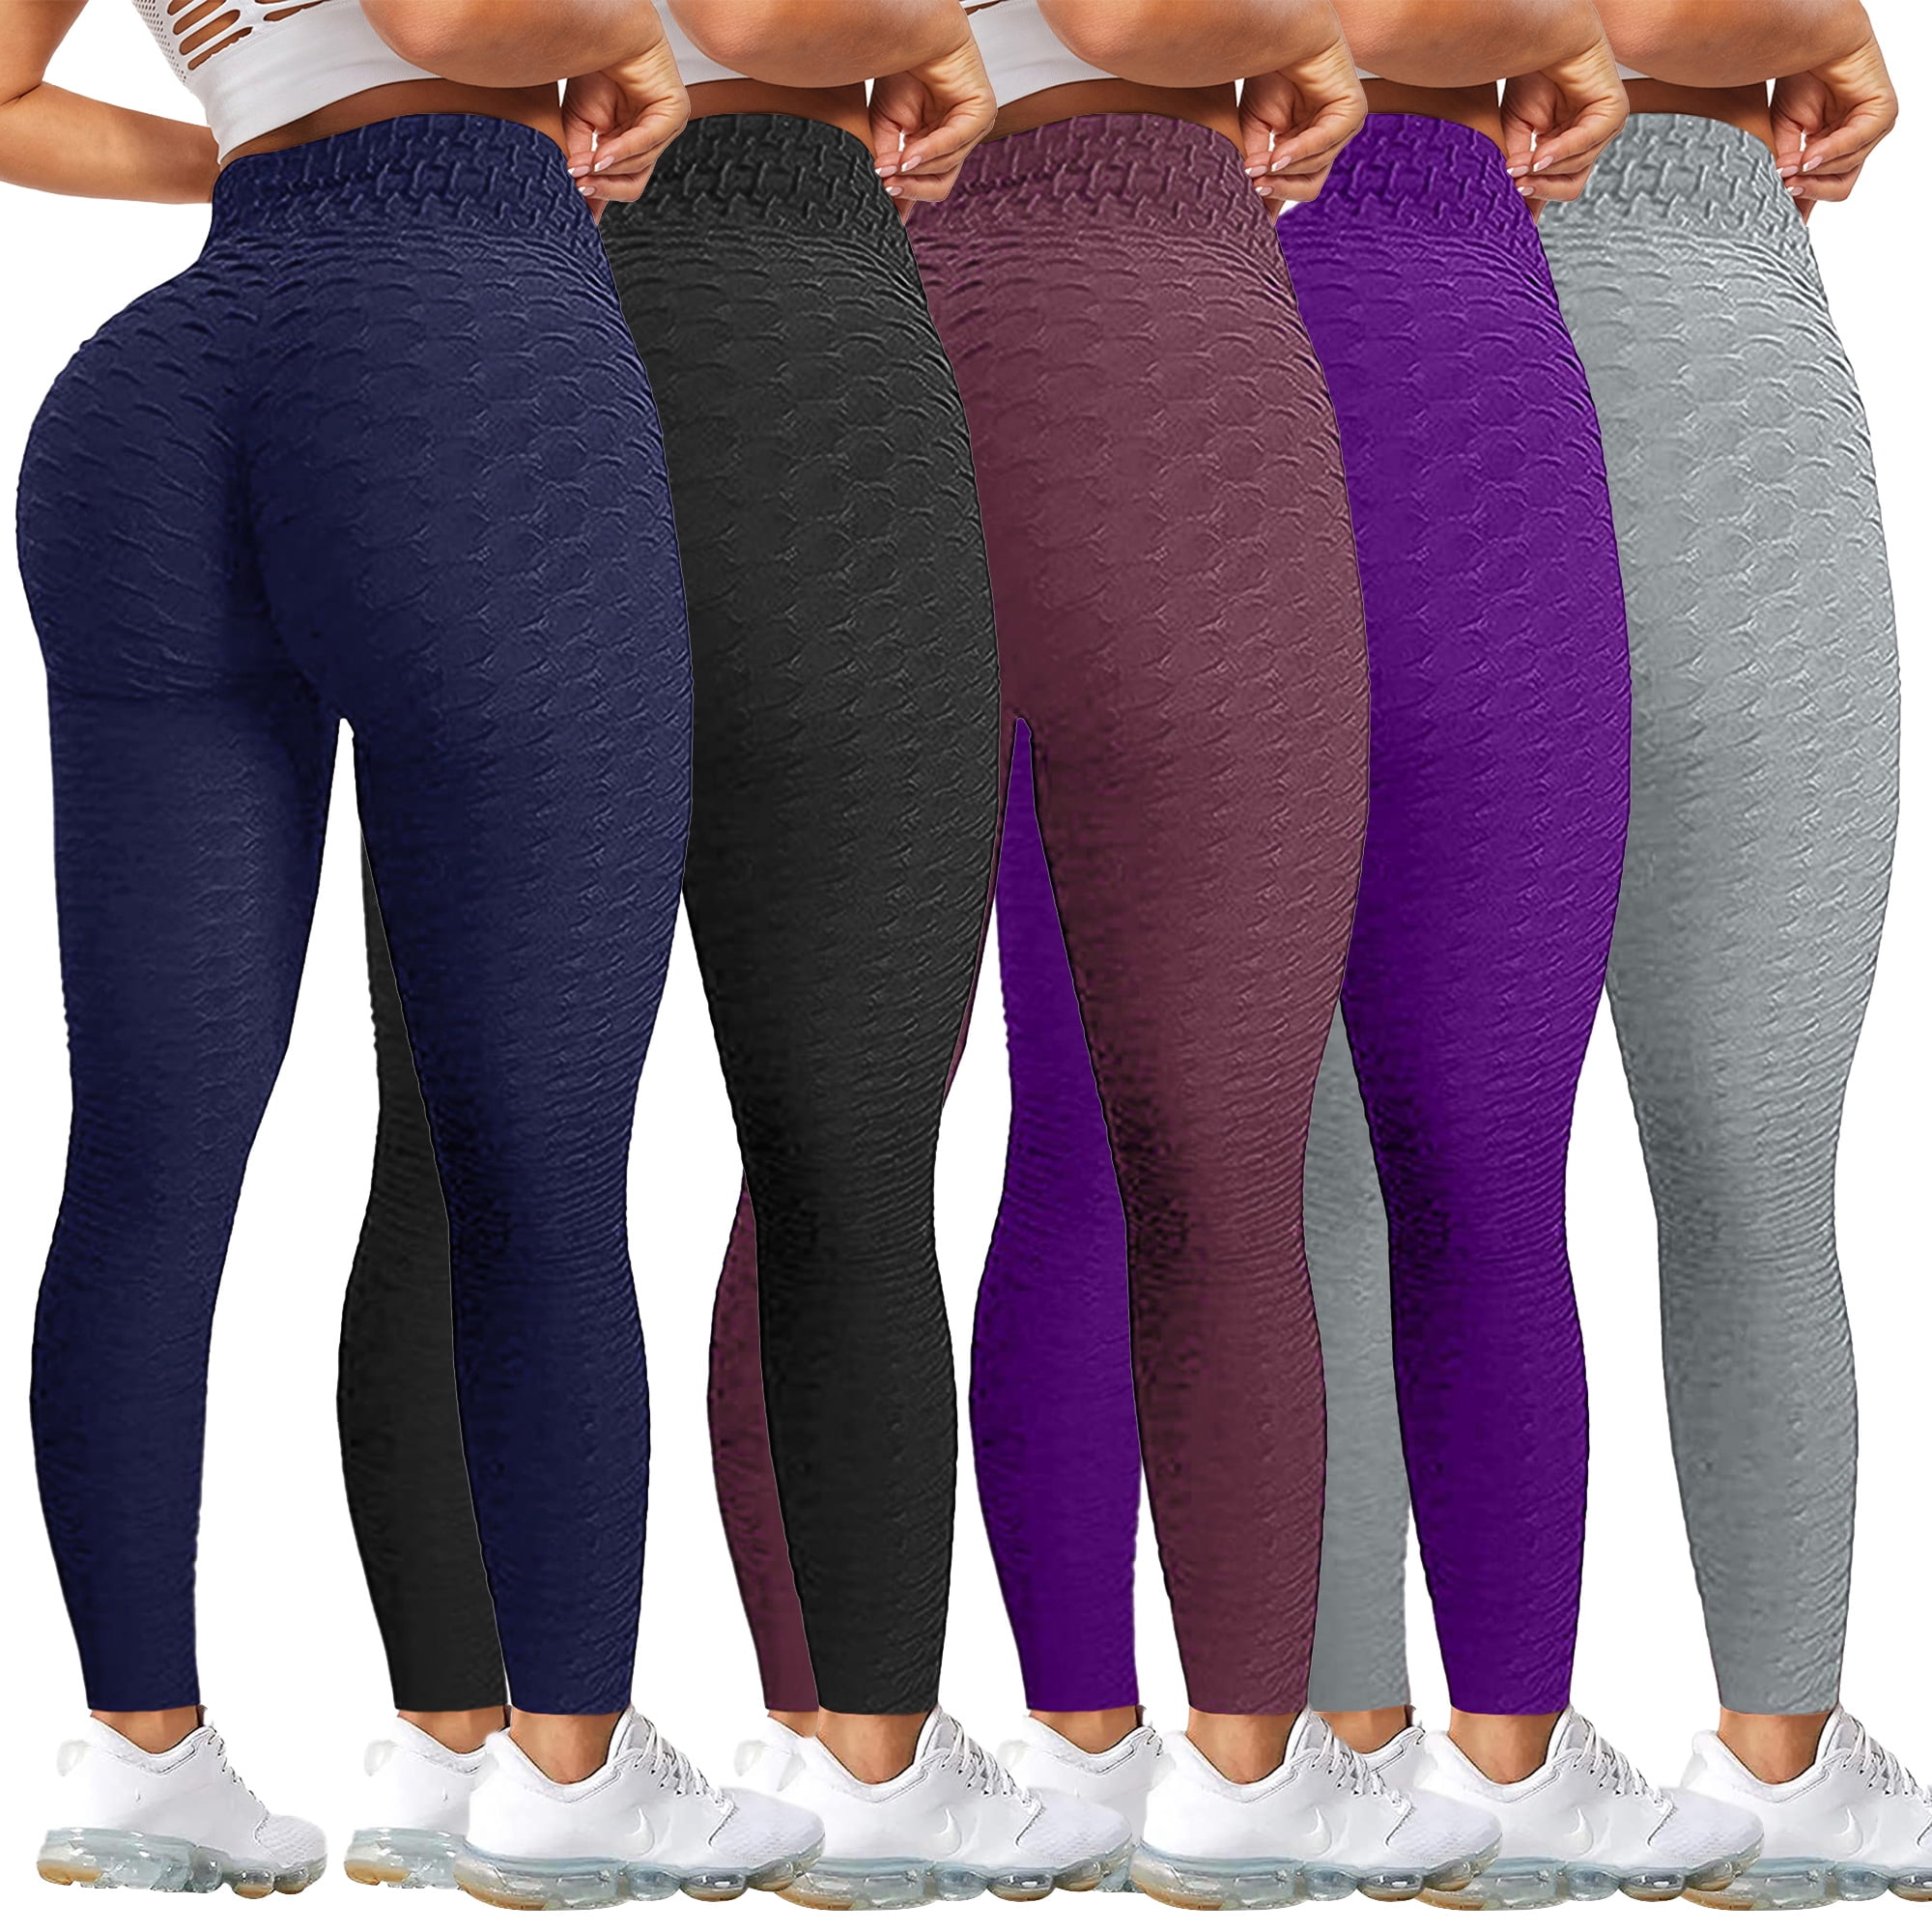 Women High Waist Yoga Pants Anti Cellulite Leggings Ruched Sports Gym Trousers H 